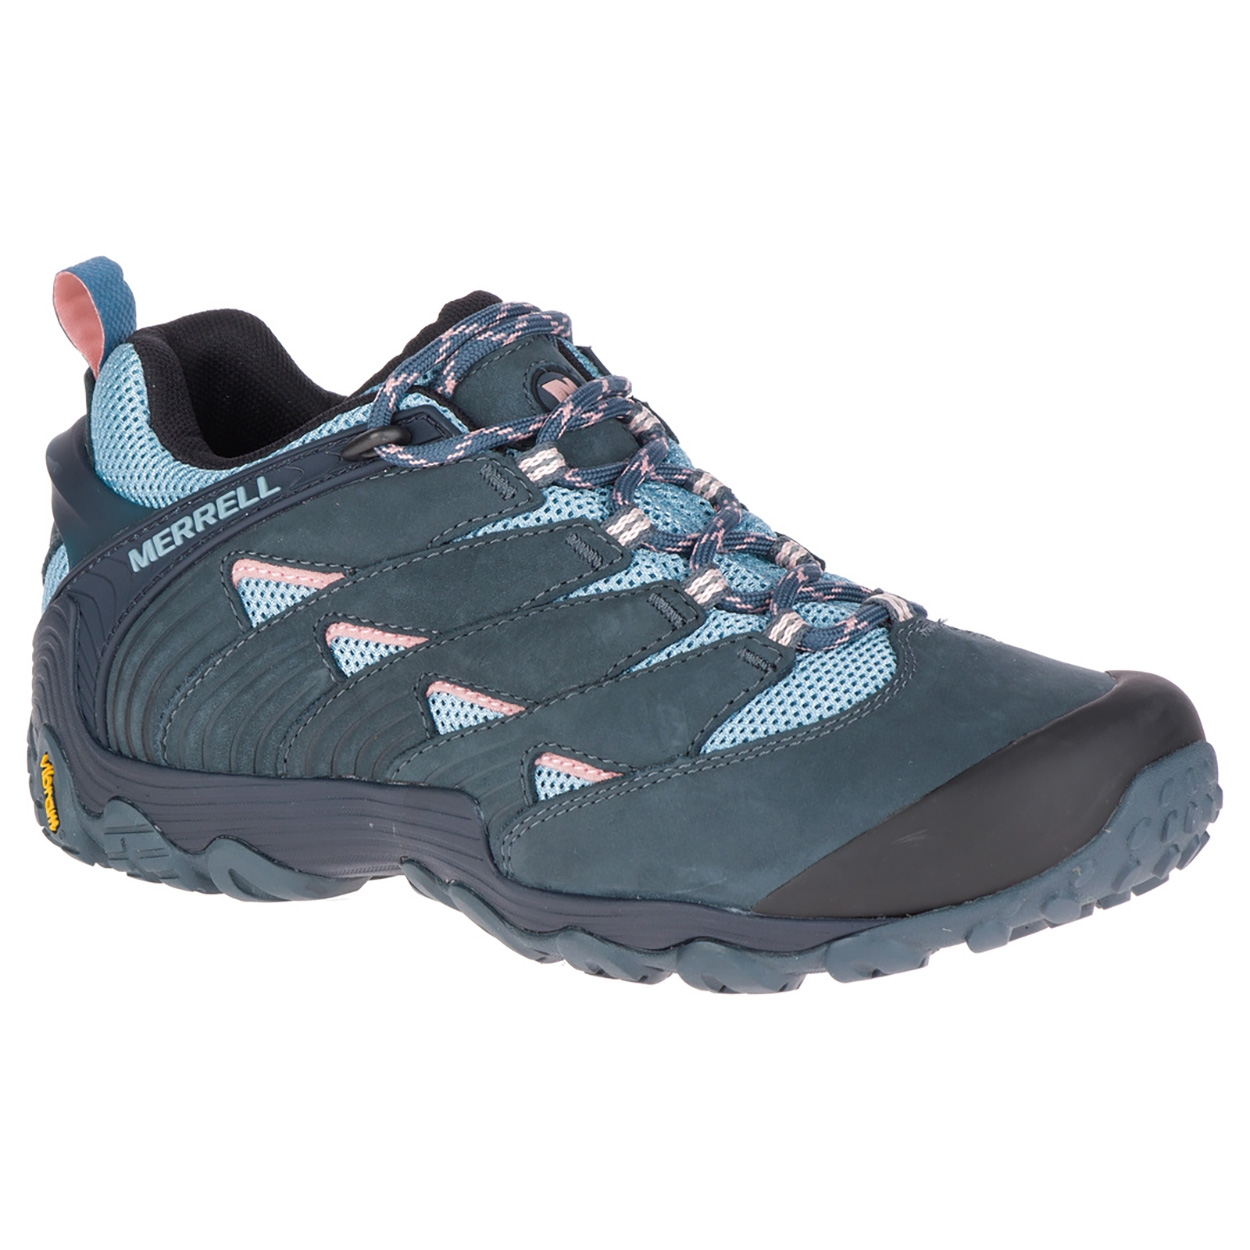 46% off on Ladies Cham 7 Slate Hiking Shoes